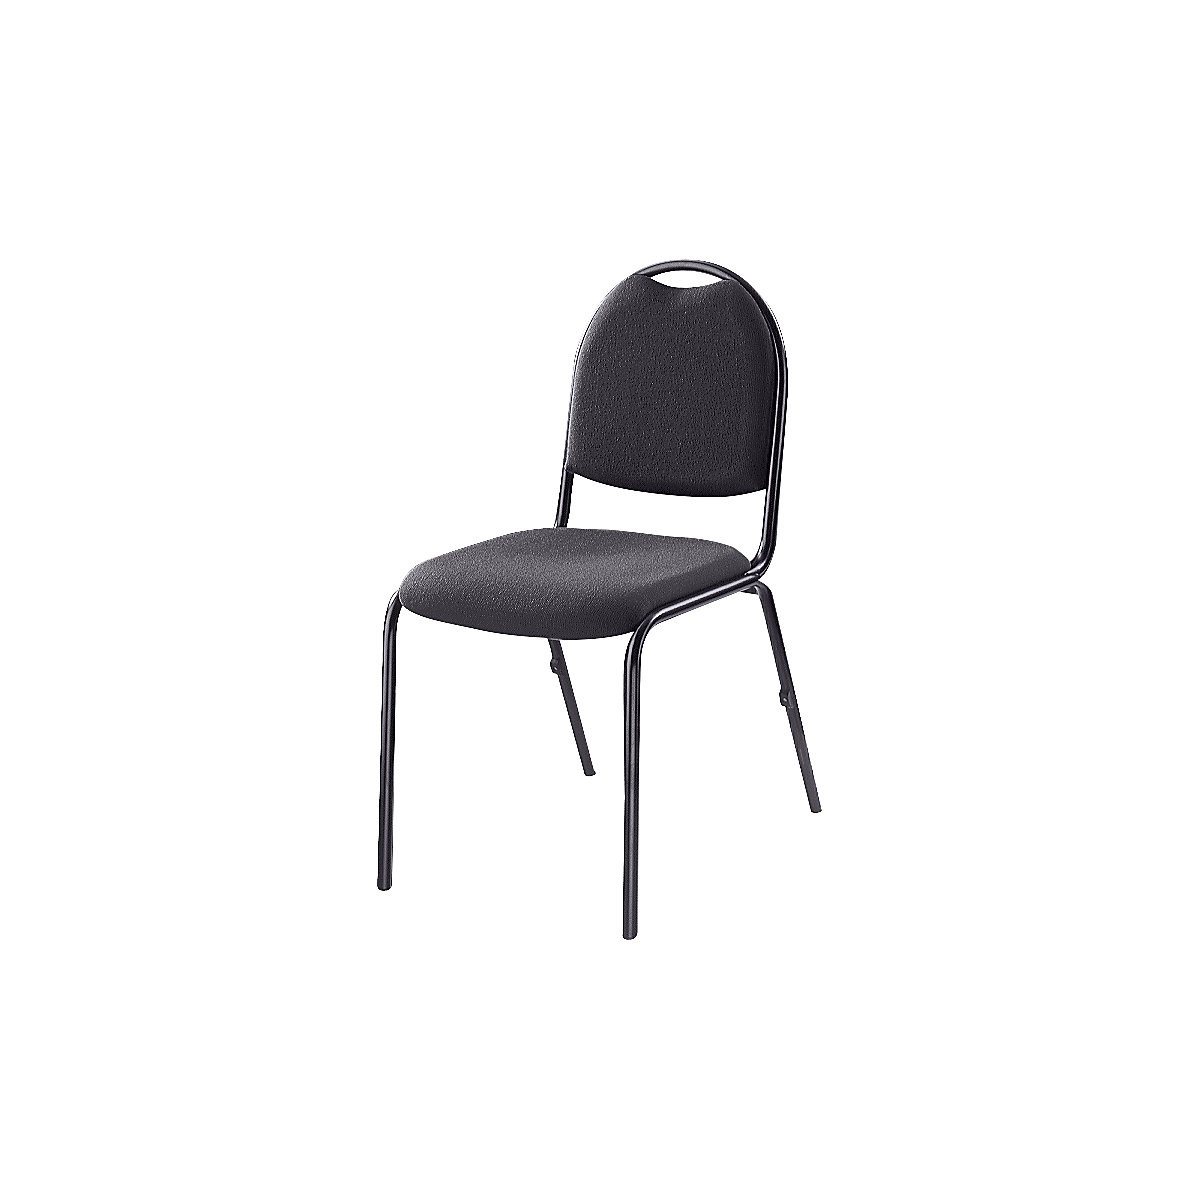 Conference and meeting room chair – eurokraft pro